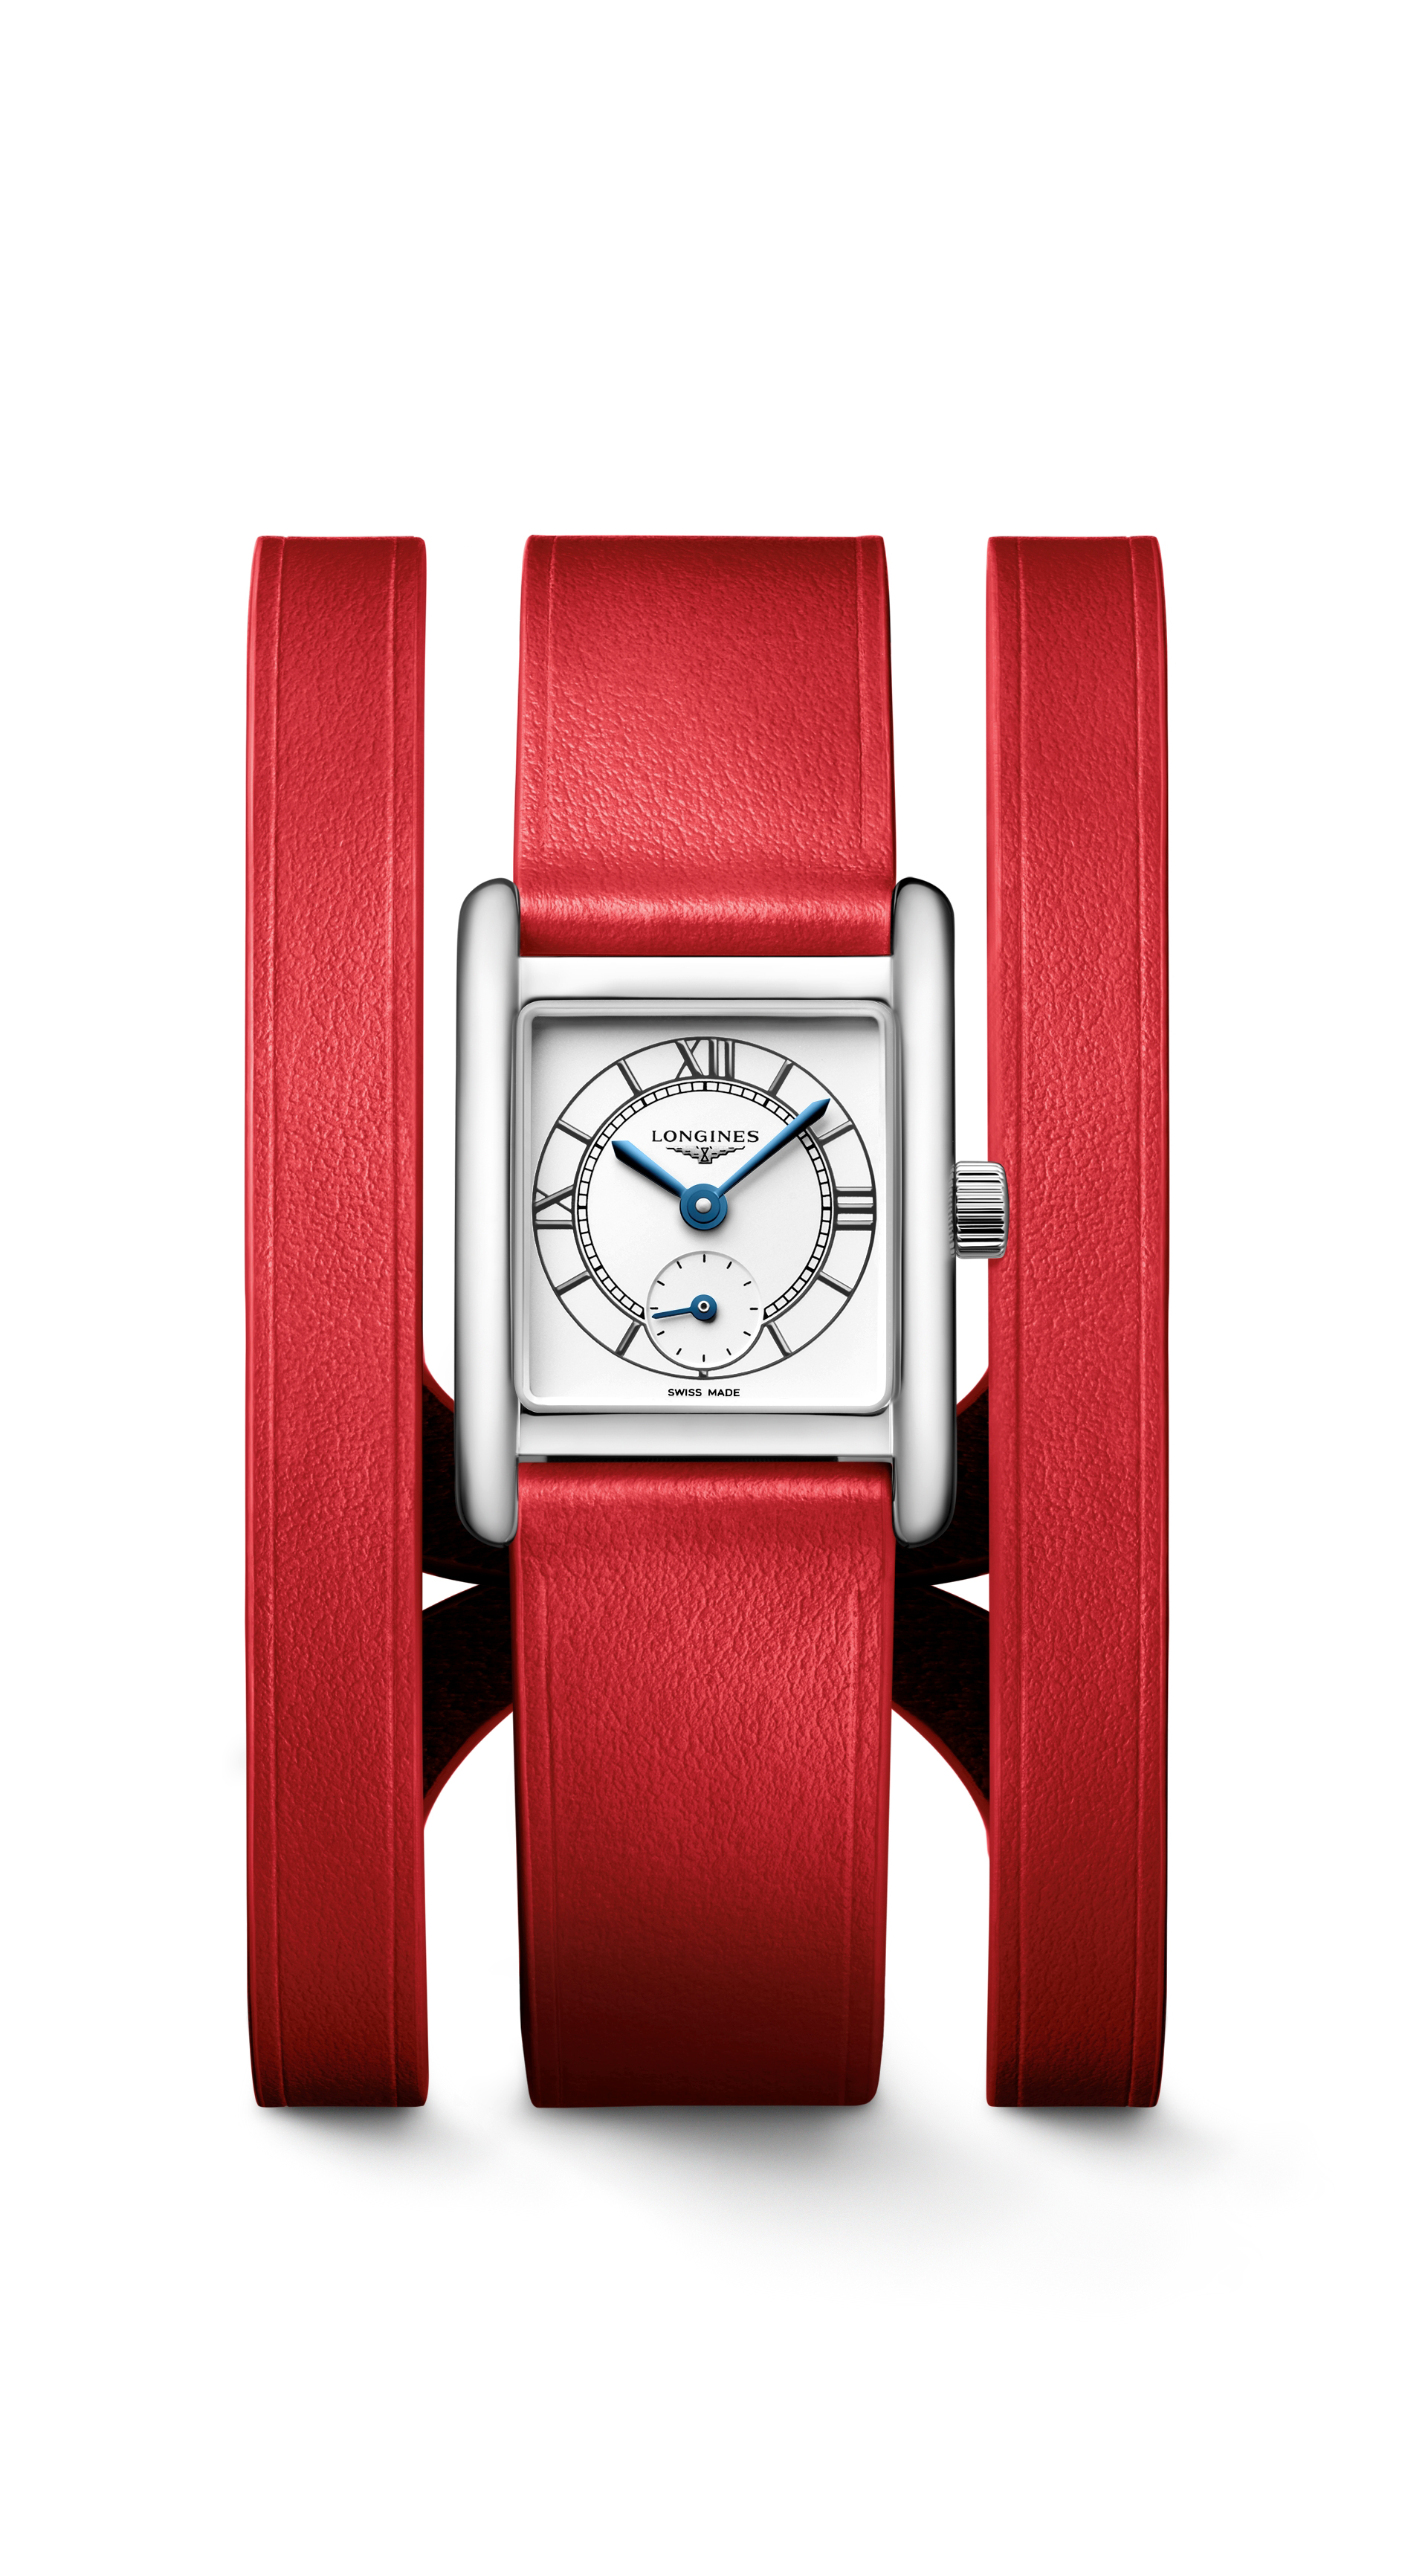 Longines mini dolcevita watch with red leather double straps